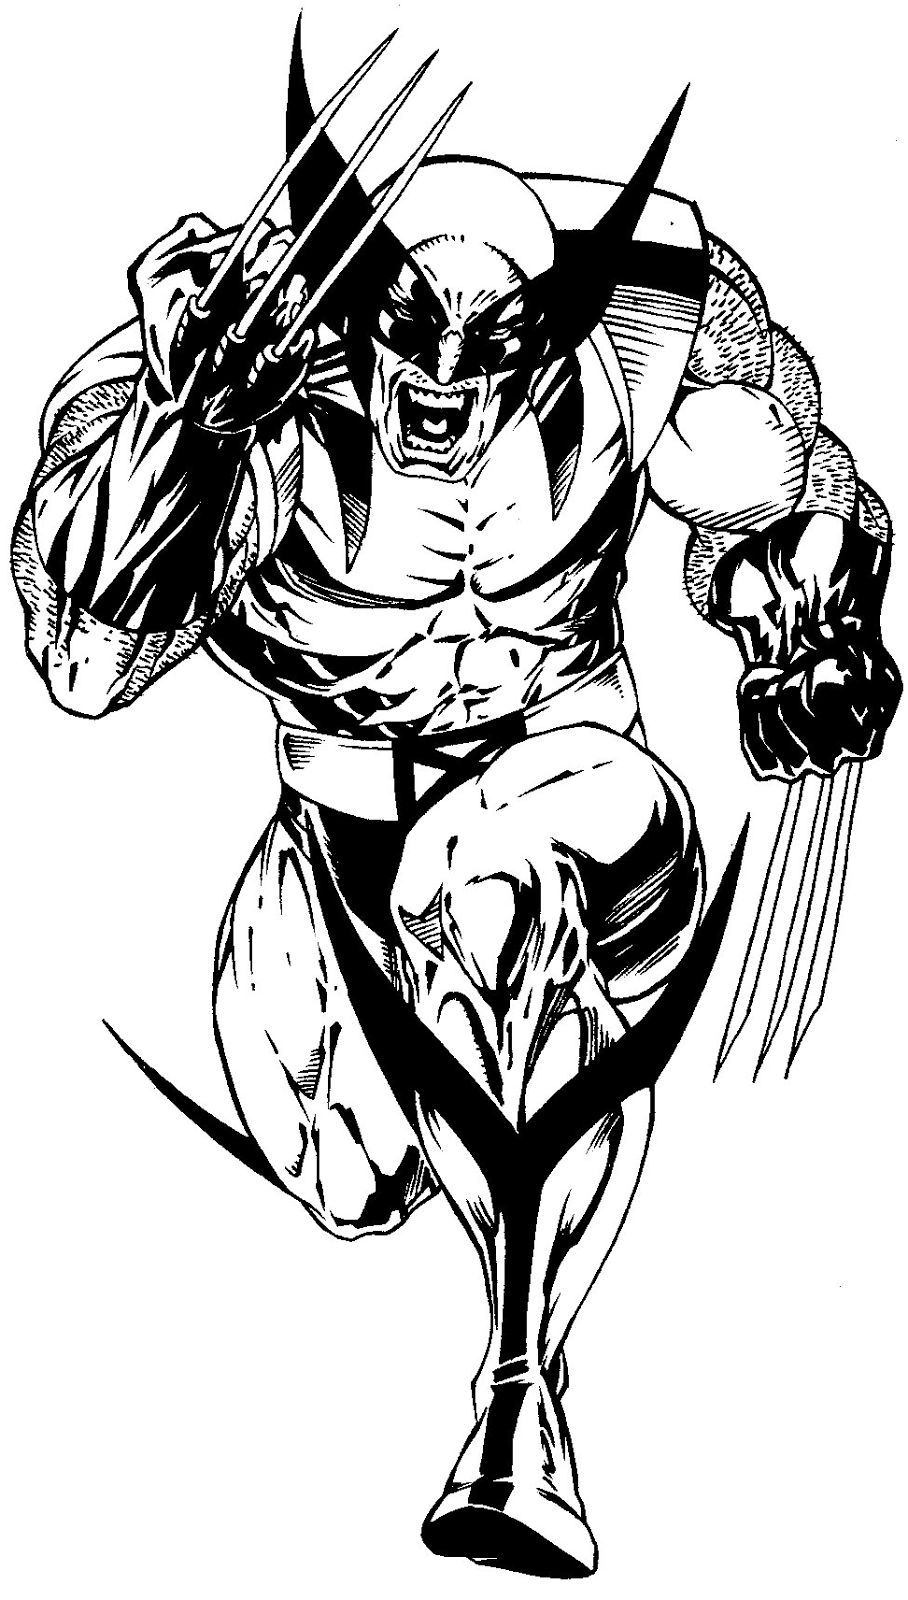 Coloring pages for kids free images: Wolverine Logan free coloring ...